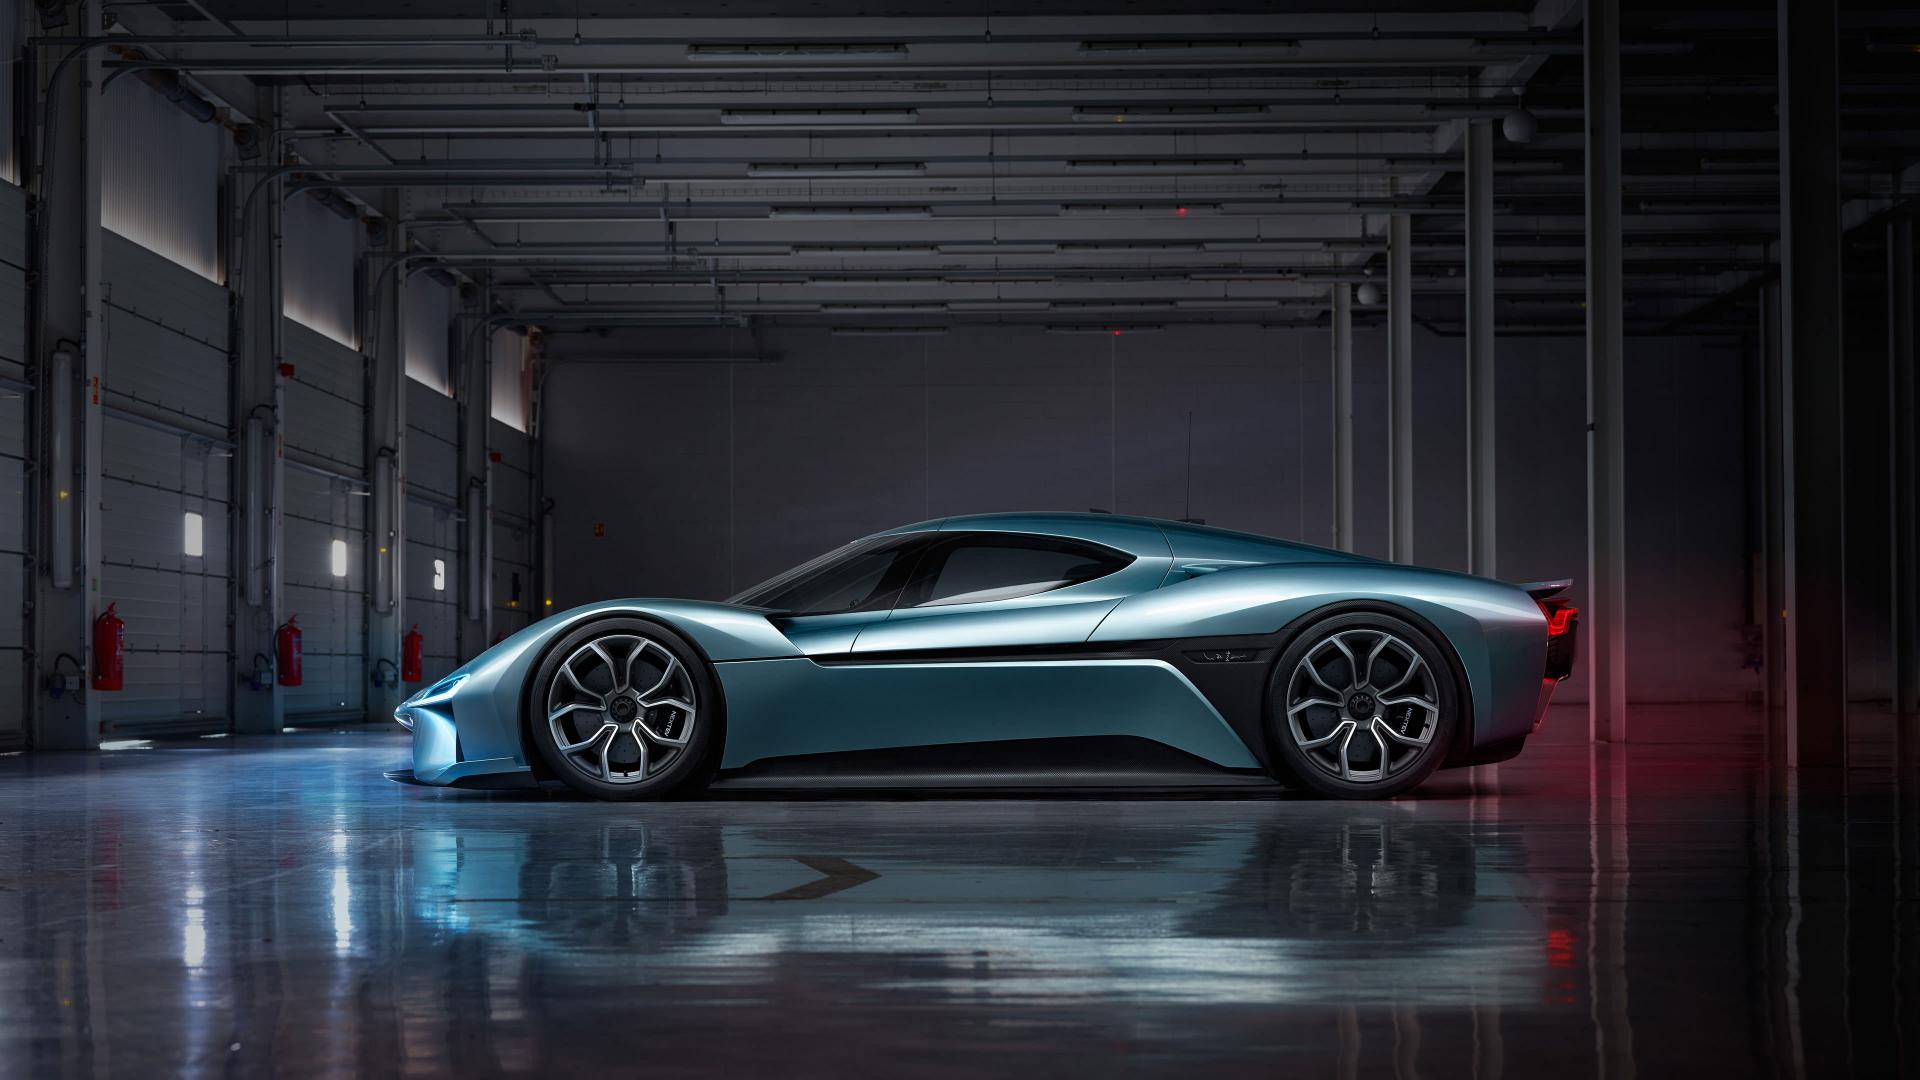 nextev-s-nio-ep9-is-the-fastest-electric-car-on-the-nurburgring-113122_1.jpg